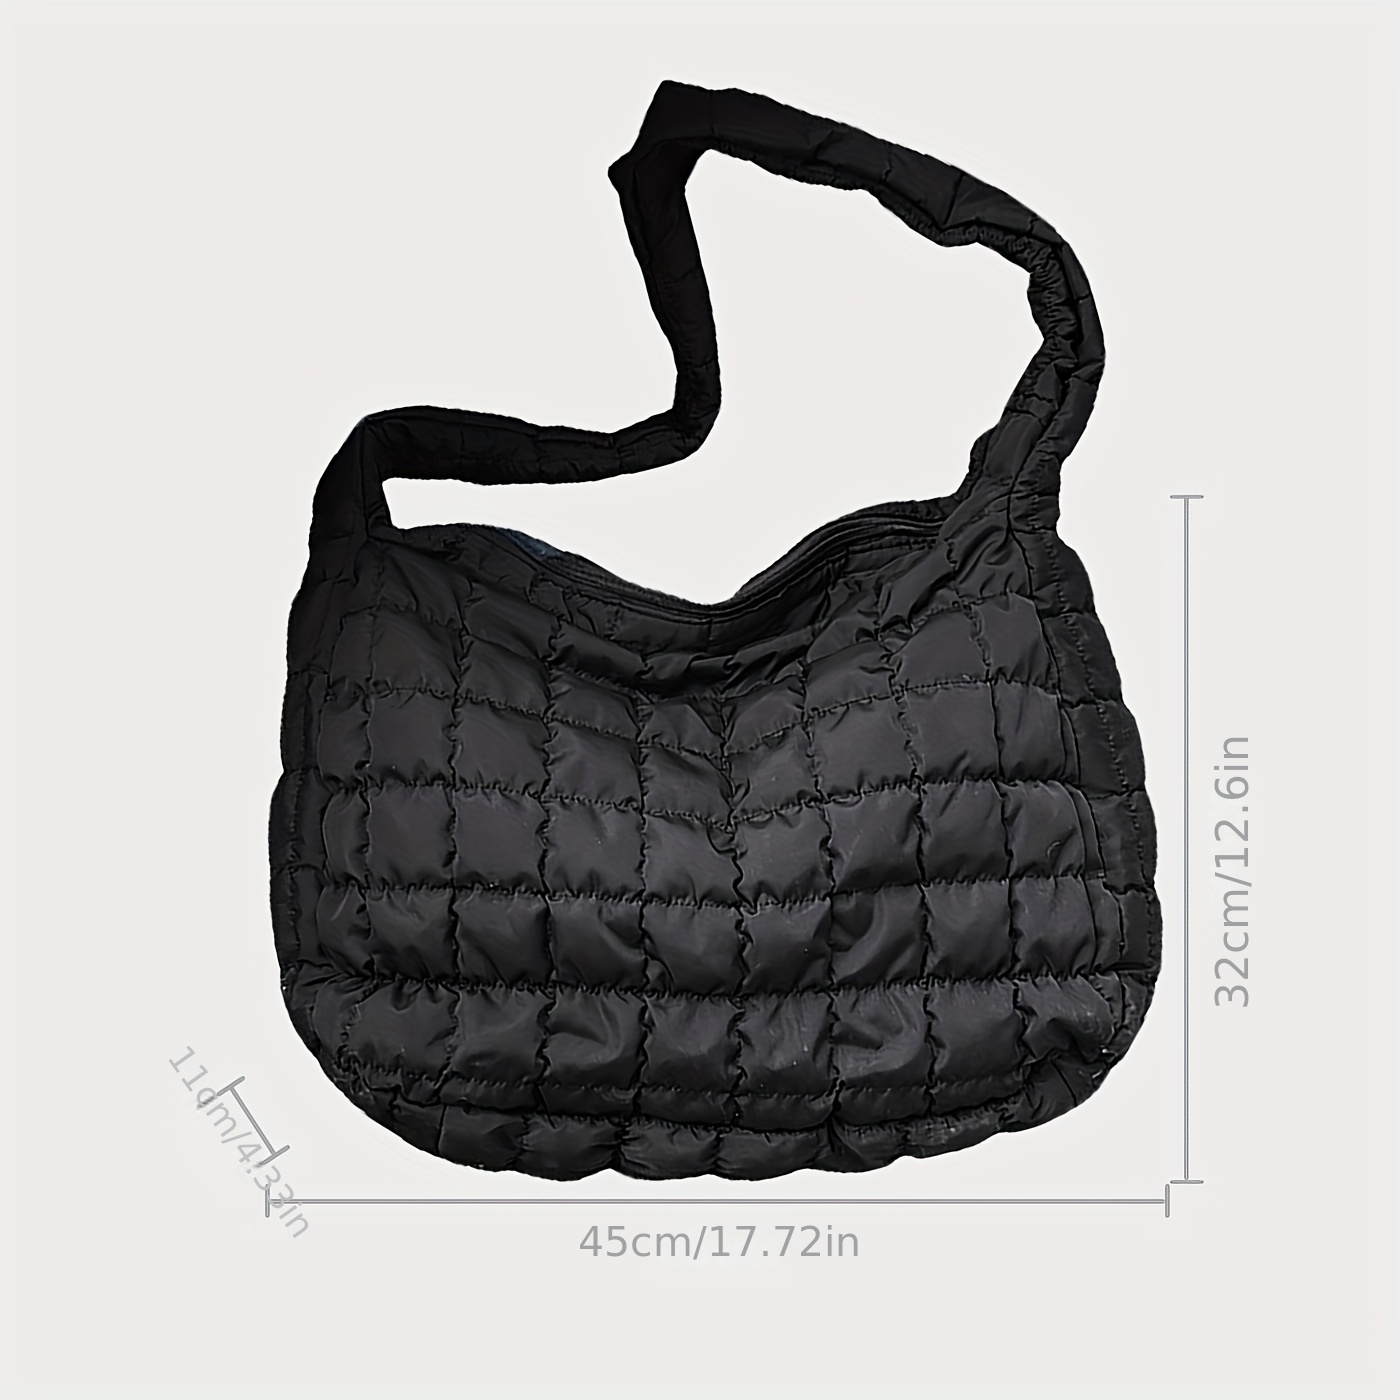  Large Black Shoulder Crossbody Purses - Cute Quilted